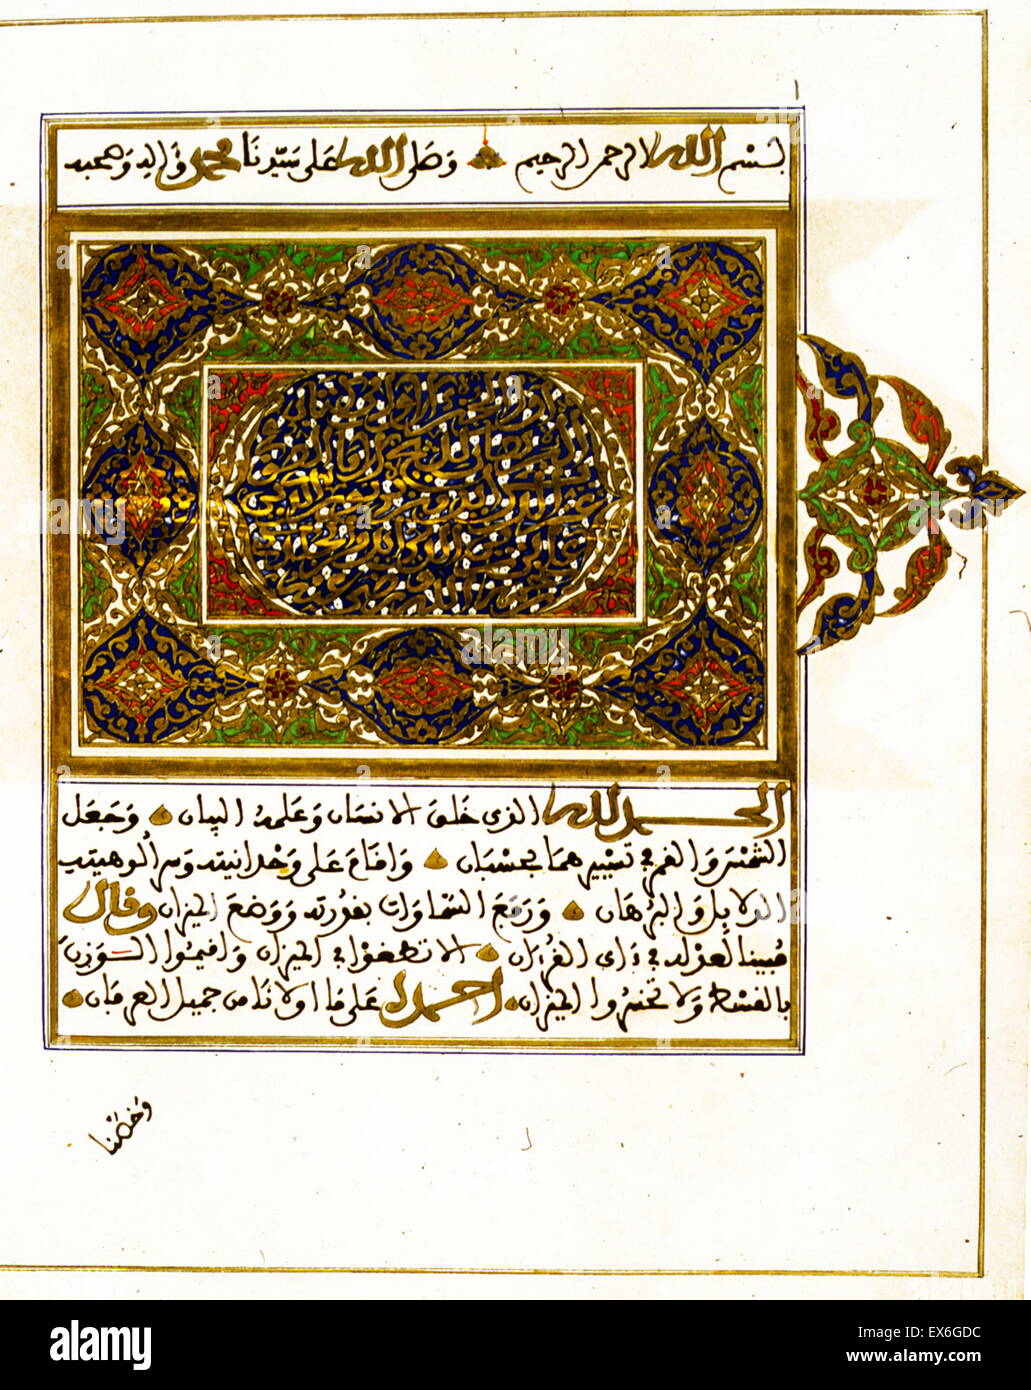 The illuminated opening of a copy of the alchemical treatise Kit?b al-Burh?n f? asr?r ‘ilm al-m?z?n (Proof Regarding the Secrets of the Science of the Balance) by al-Jaldak? (d. 1342/743). The undated and unsigned copy was made in Morocco and is typical o Stock Photo